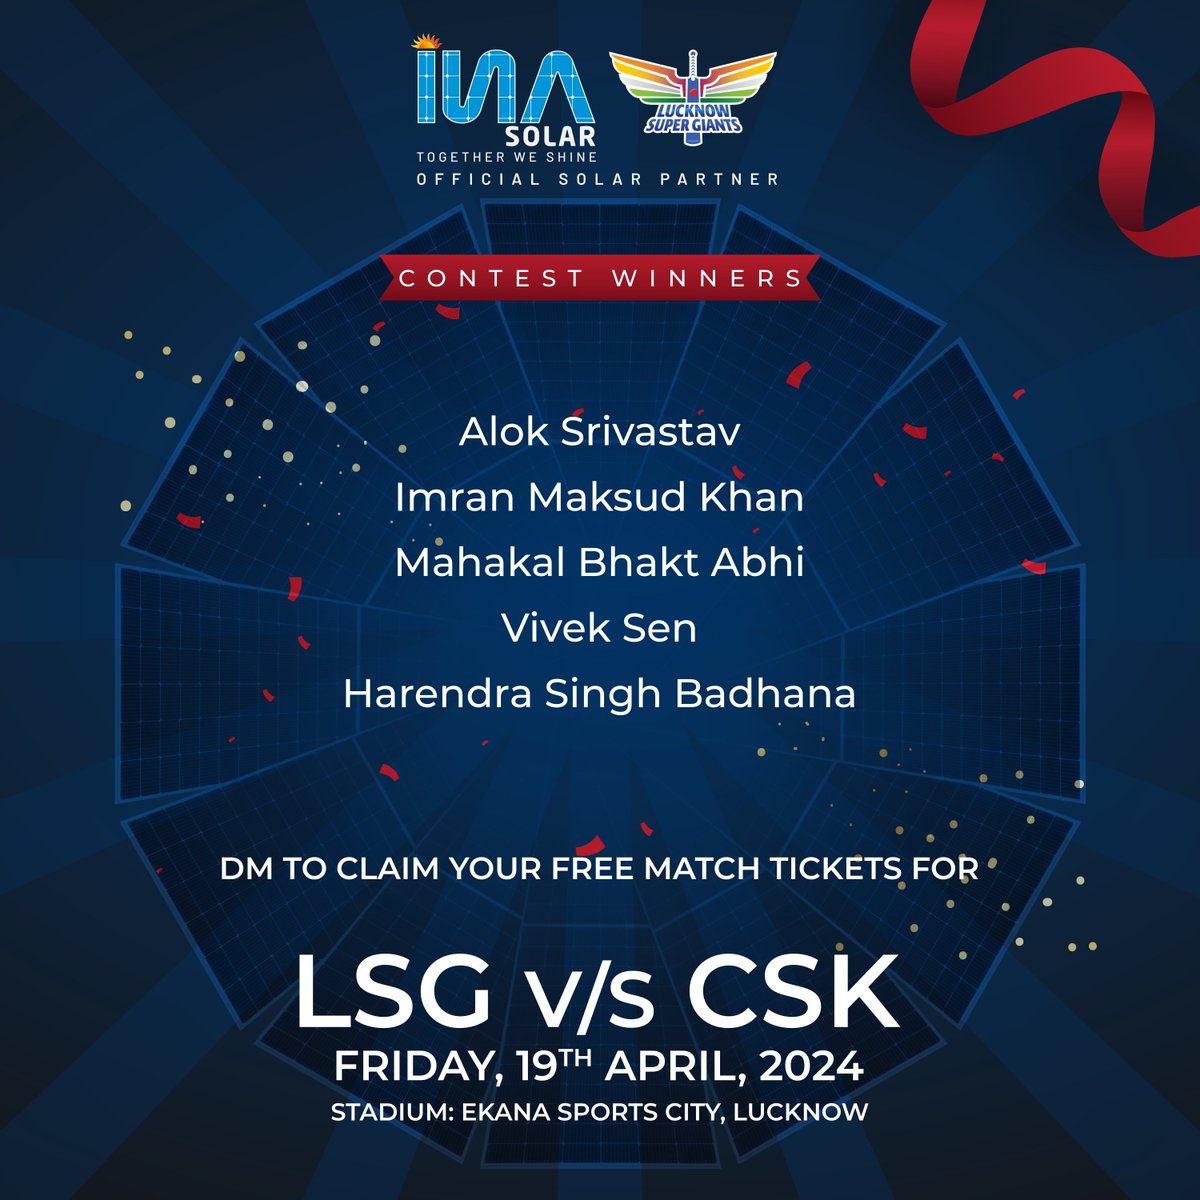 INA Solar congratulates our lucky ticket winners.
Thank you to everyone who participated.
Stay tuned for more chances to win tickets and join us in celebrating cricket in style!'
.
.
.
.
#INASolar #winnersannouncement #winners #contestwinner #contestgiveaway #ipl2024 #ipl24